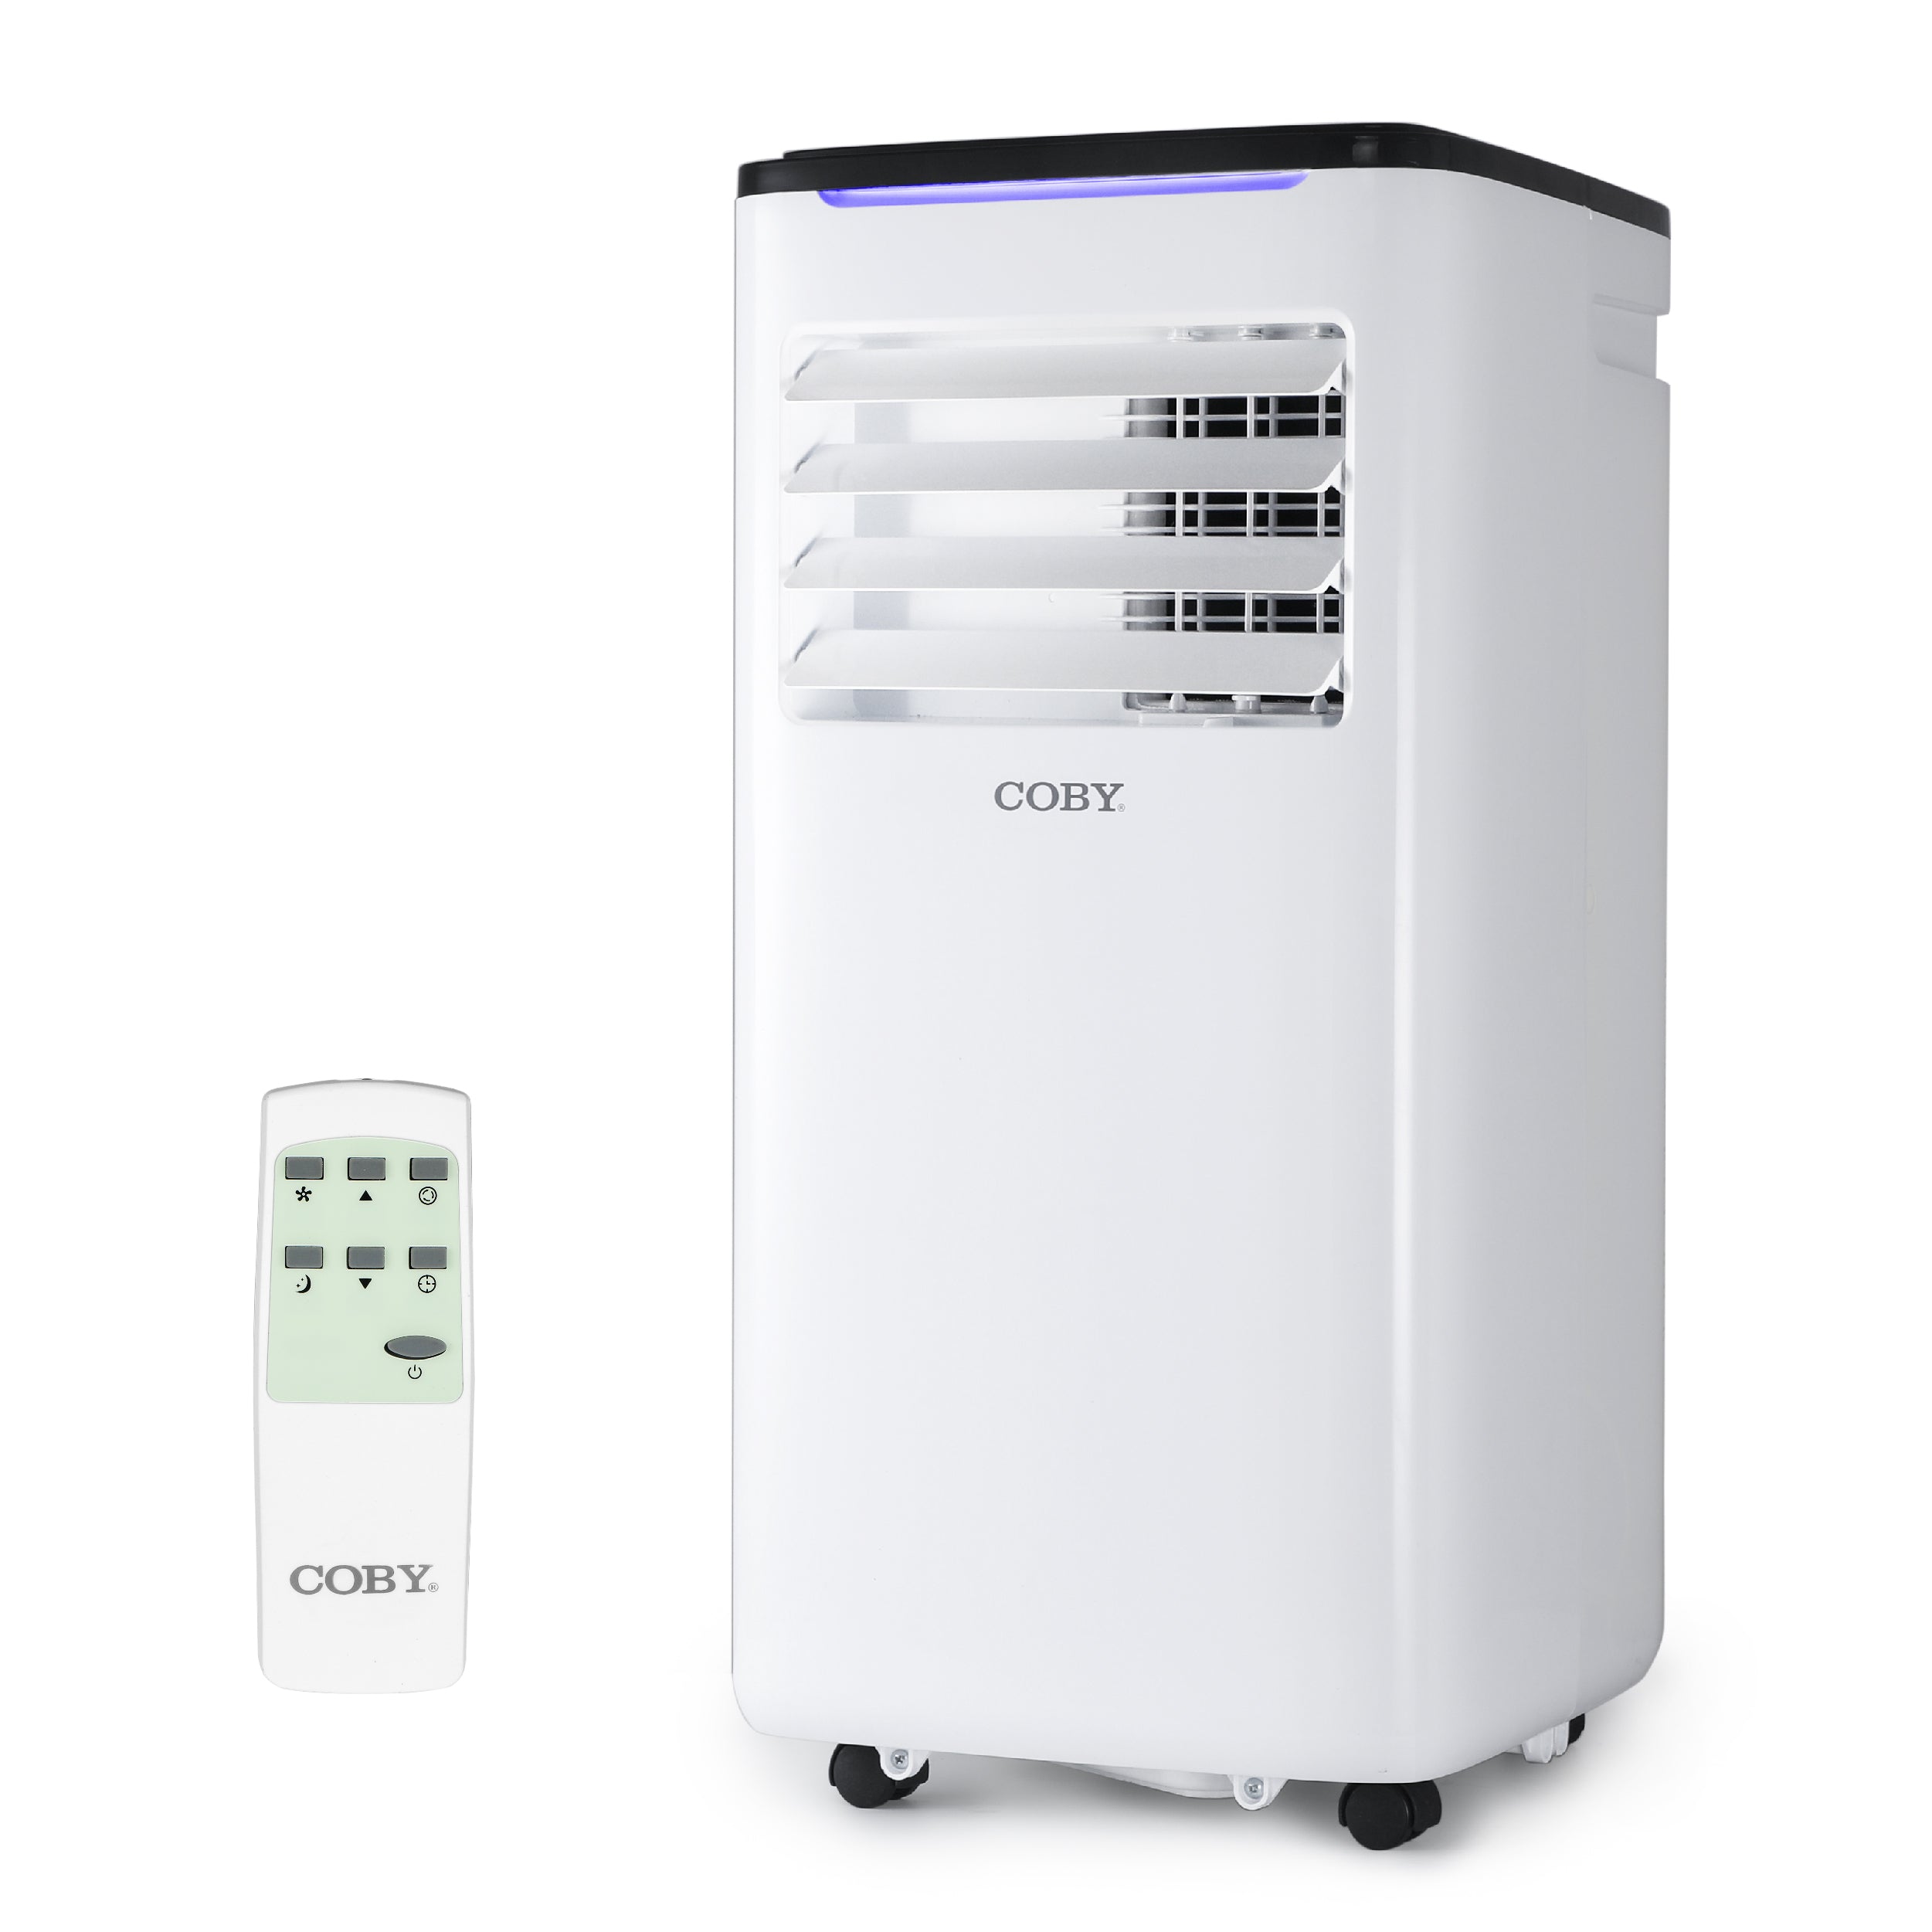 COBY Portable Air Conditioner 3-in-1 AC Unit, Dehumidifier & Fan, Air Conditioner 10,000 BTU Portable AC Unit with Remote Control for Rooms up to 450 Sq. Ft., 24-Hour Timer, & Installation Kit